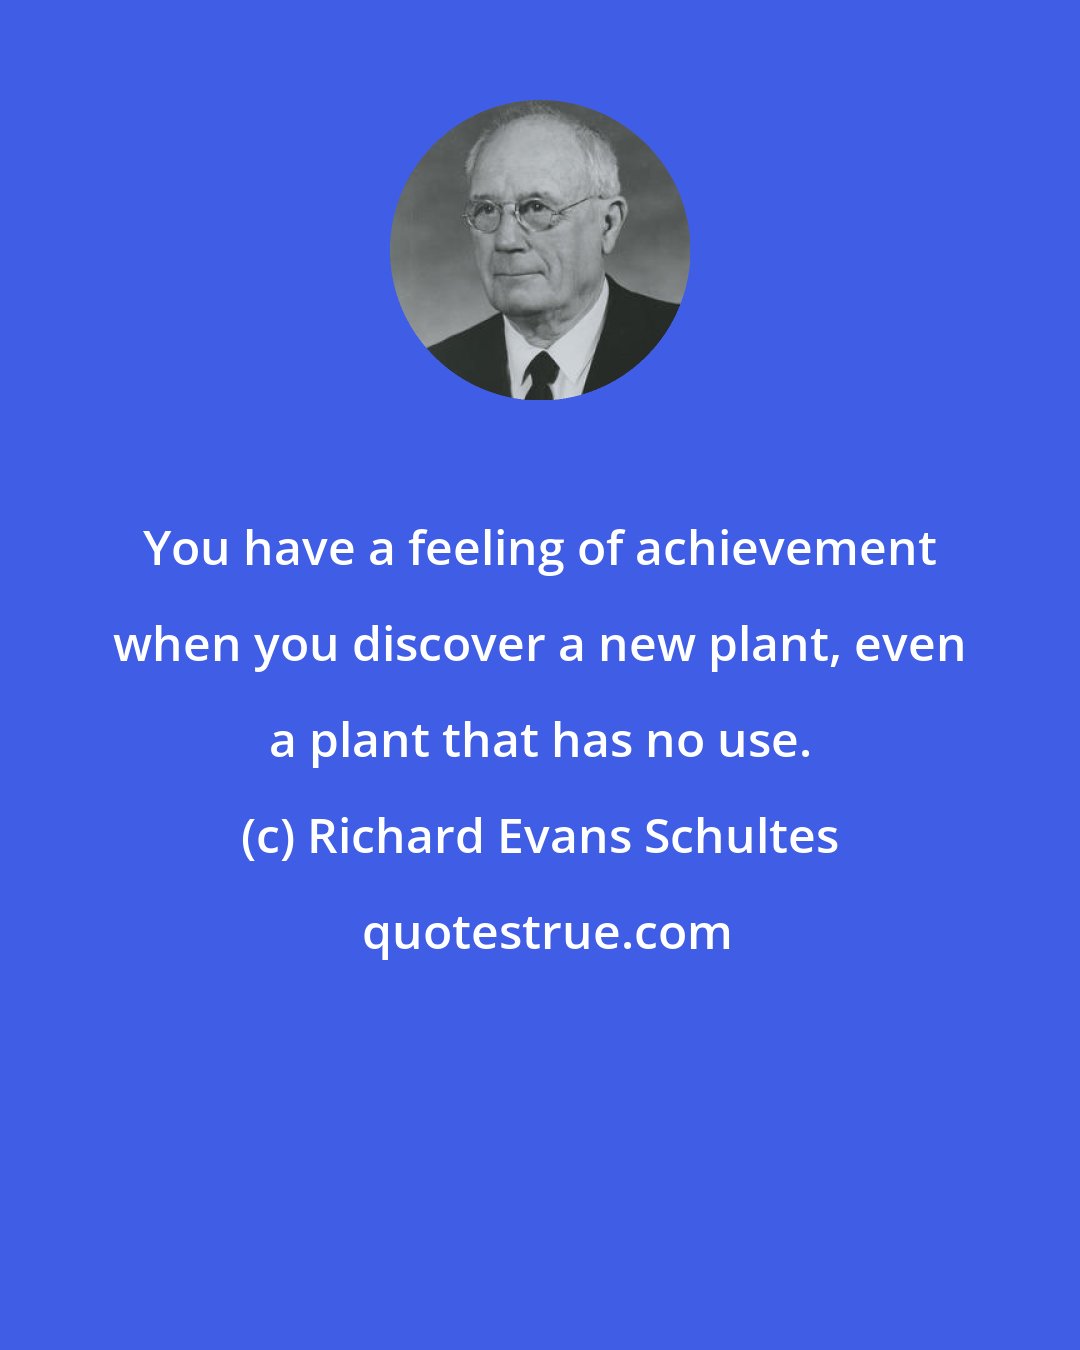 Richard Evans Schultes: You have a feeling of achievement when you discover a new plant, even a plant that has no use.